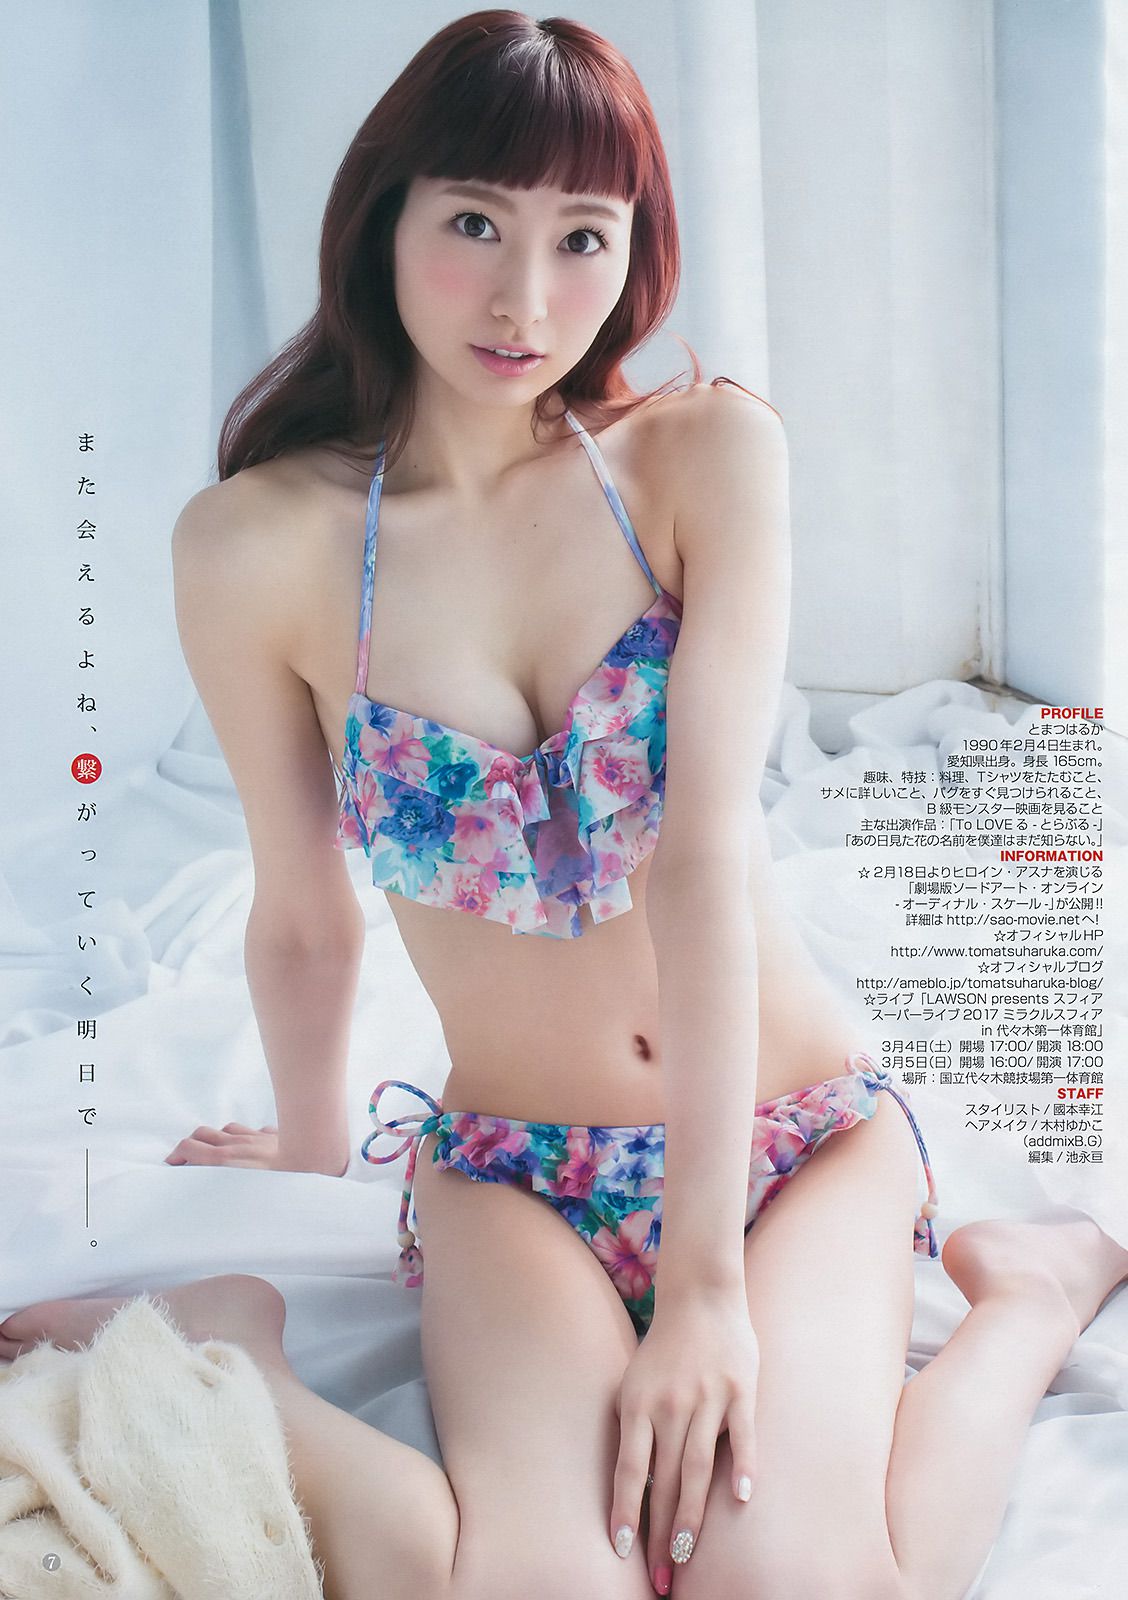 [There is also a swimsuit image] Haruka Tomatsu of the beautiful voice actor, will show off the echiechi armpit www 22